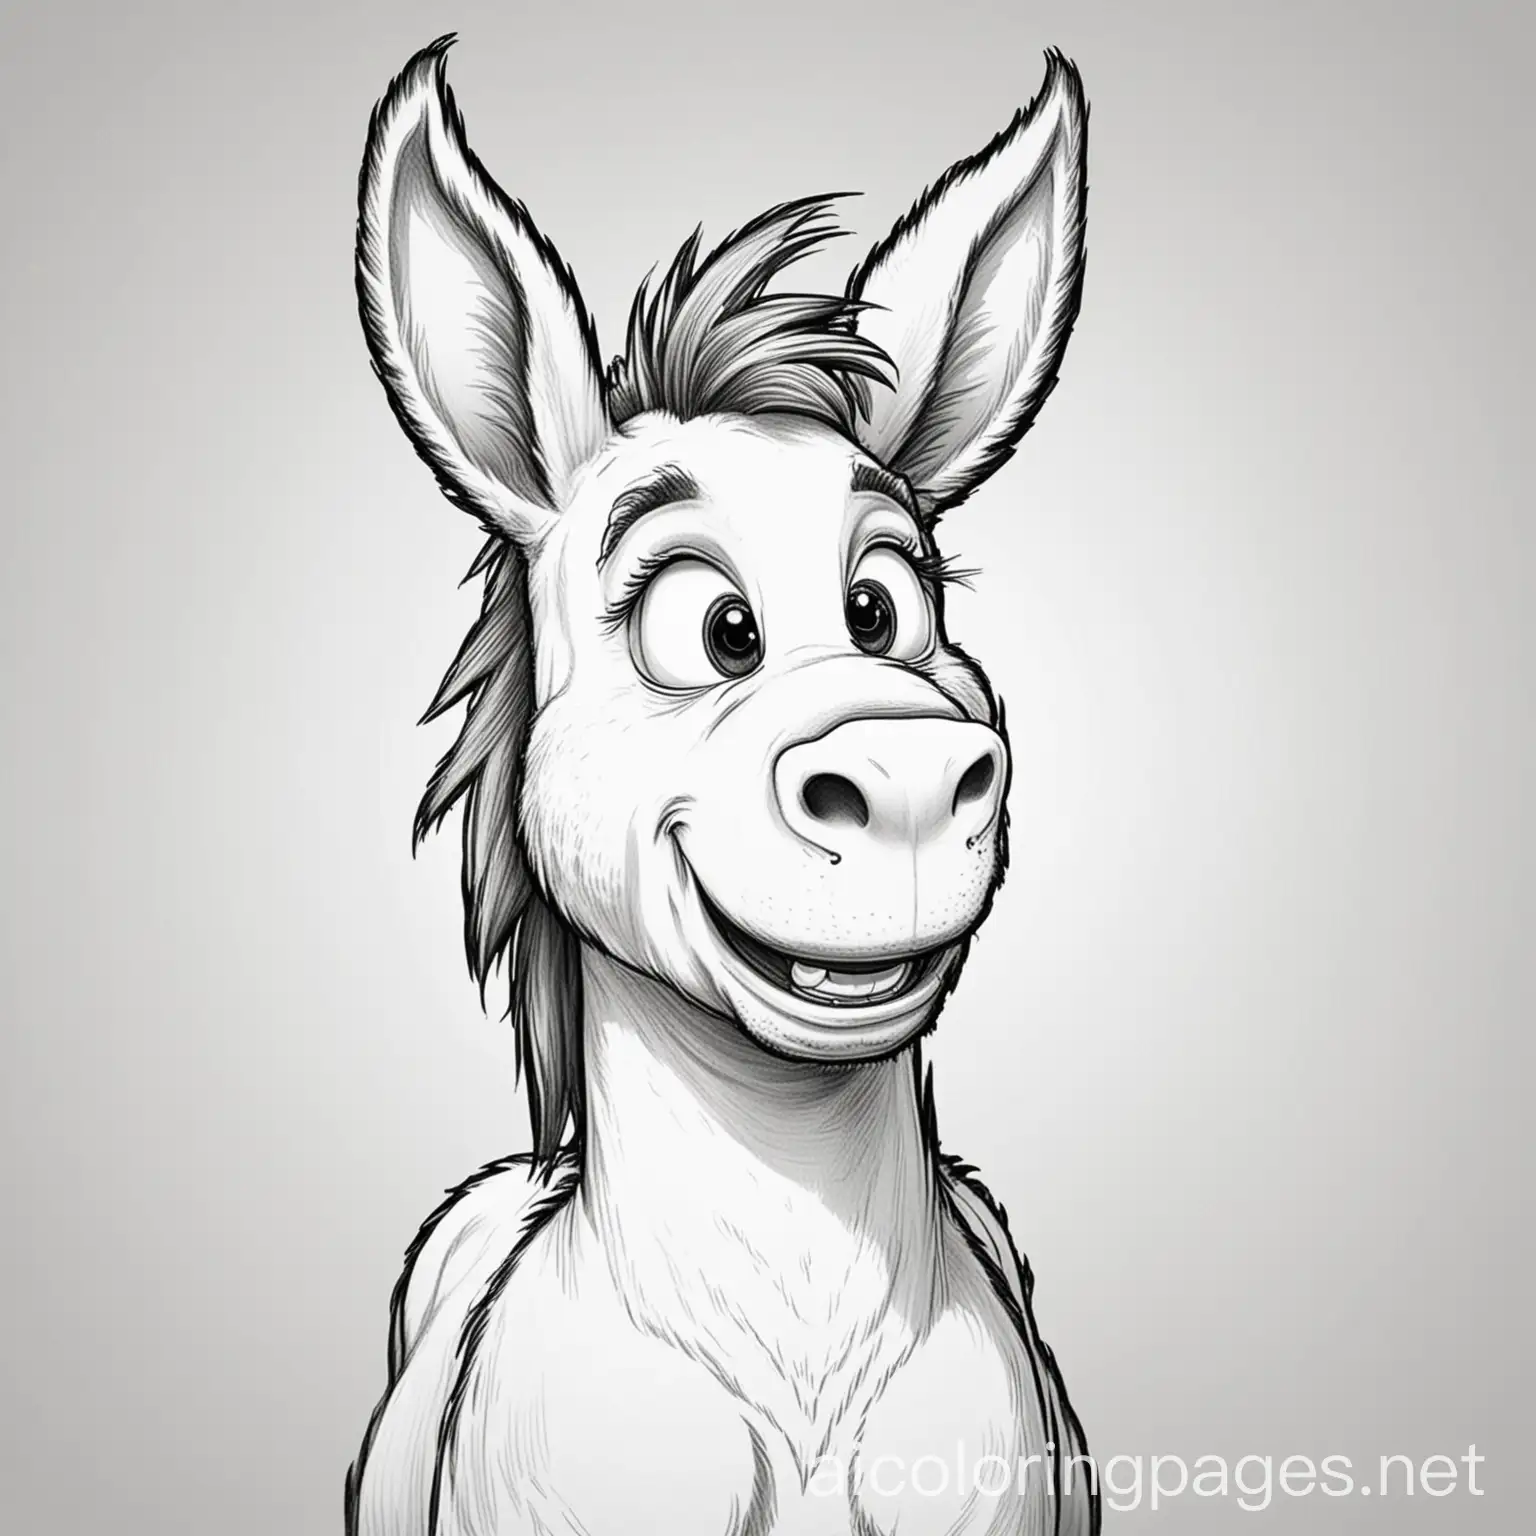 happy white cartoon  donkey, Coloring Page, black and white, line art, white background, Simplicity, Ample White Space. The background of the coloring page is plain white to make it easy for young children to color within the lines. The outlines of all the subjects are easy to distinguish, making it simple for kids to color without too much difficulty